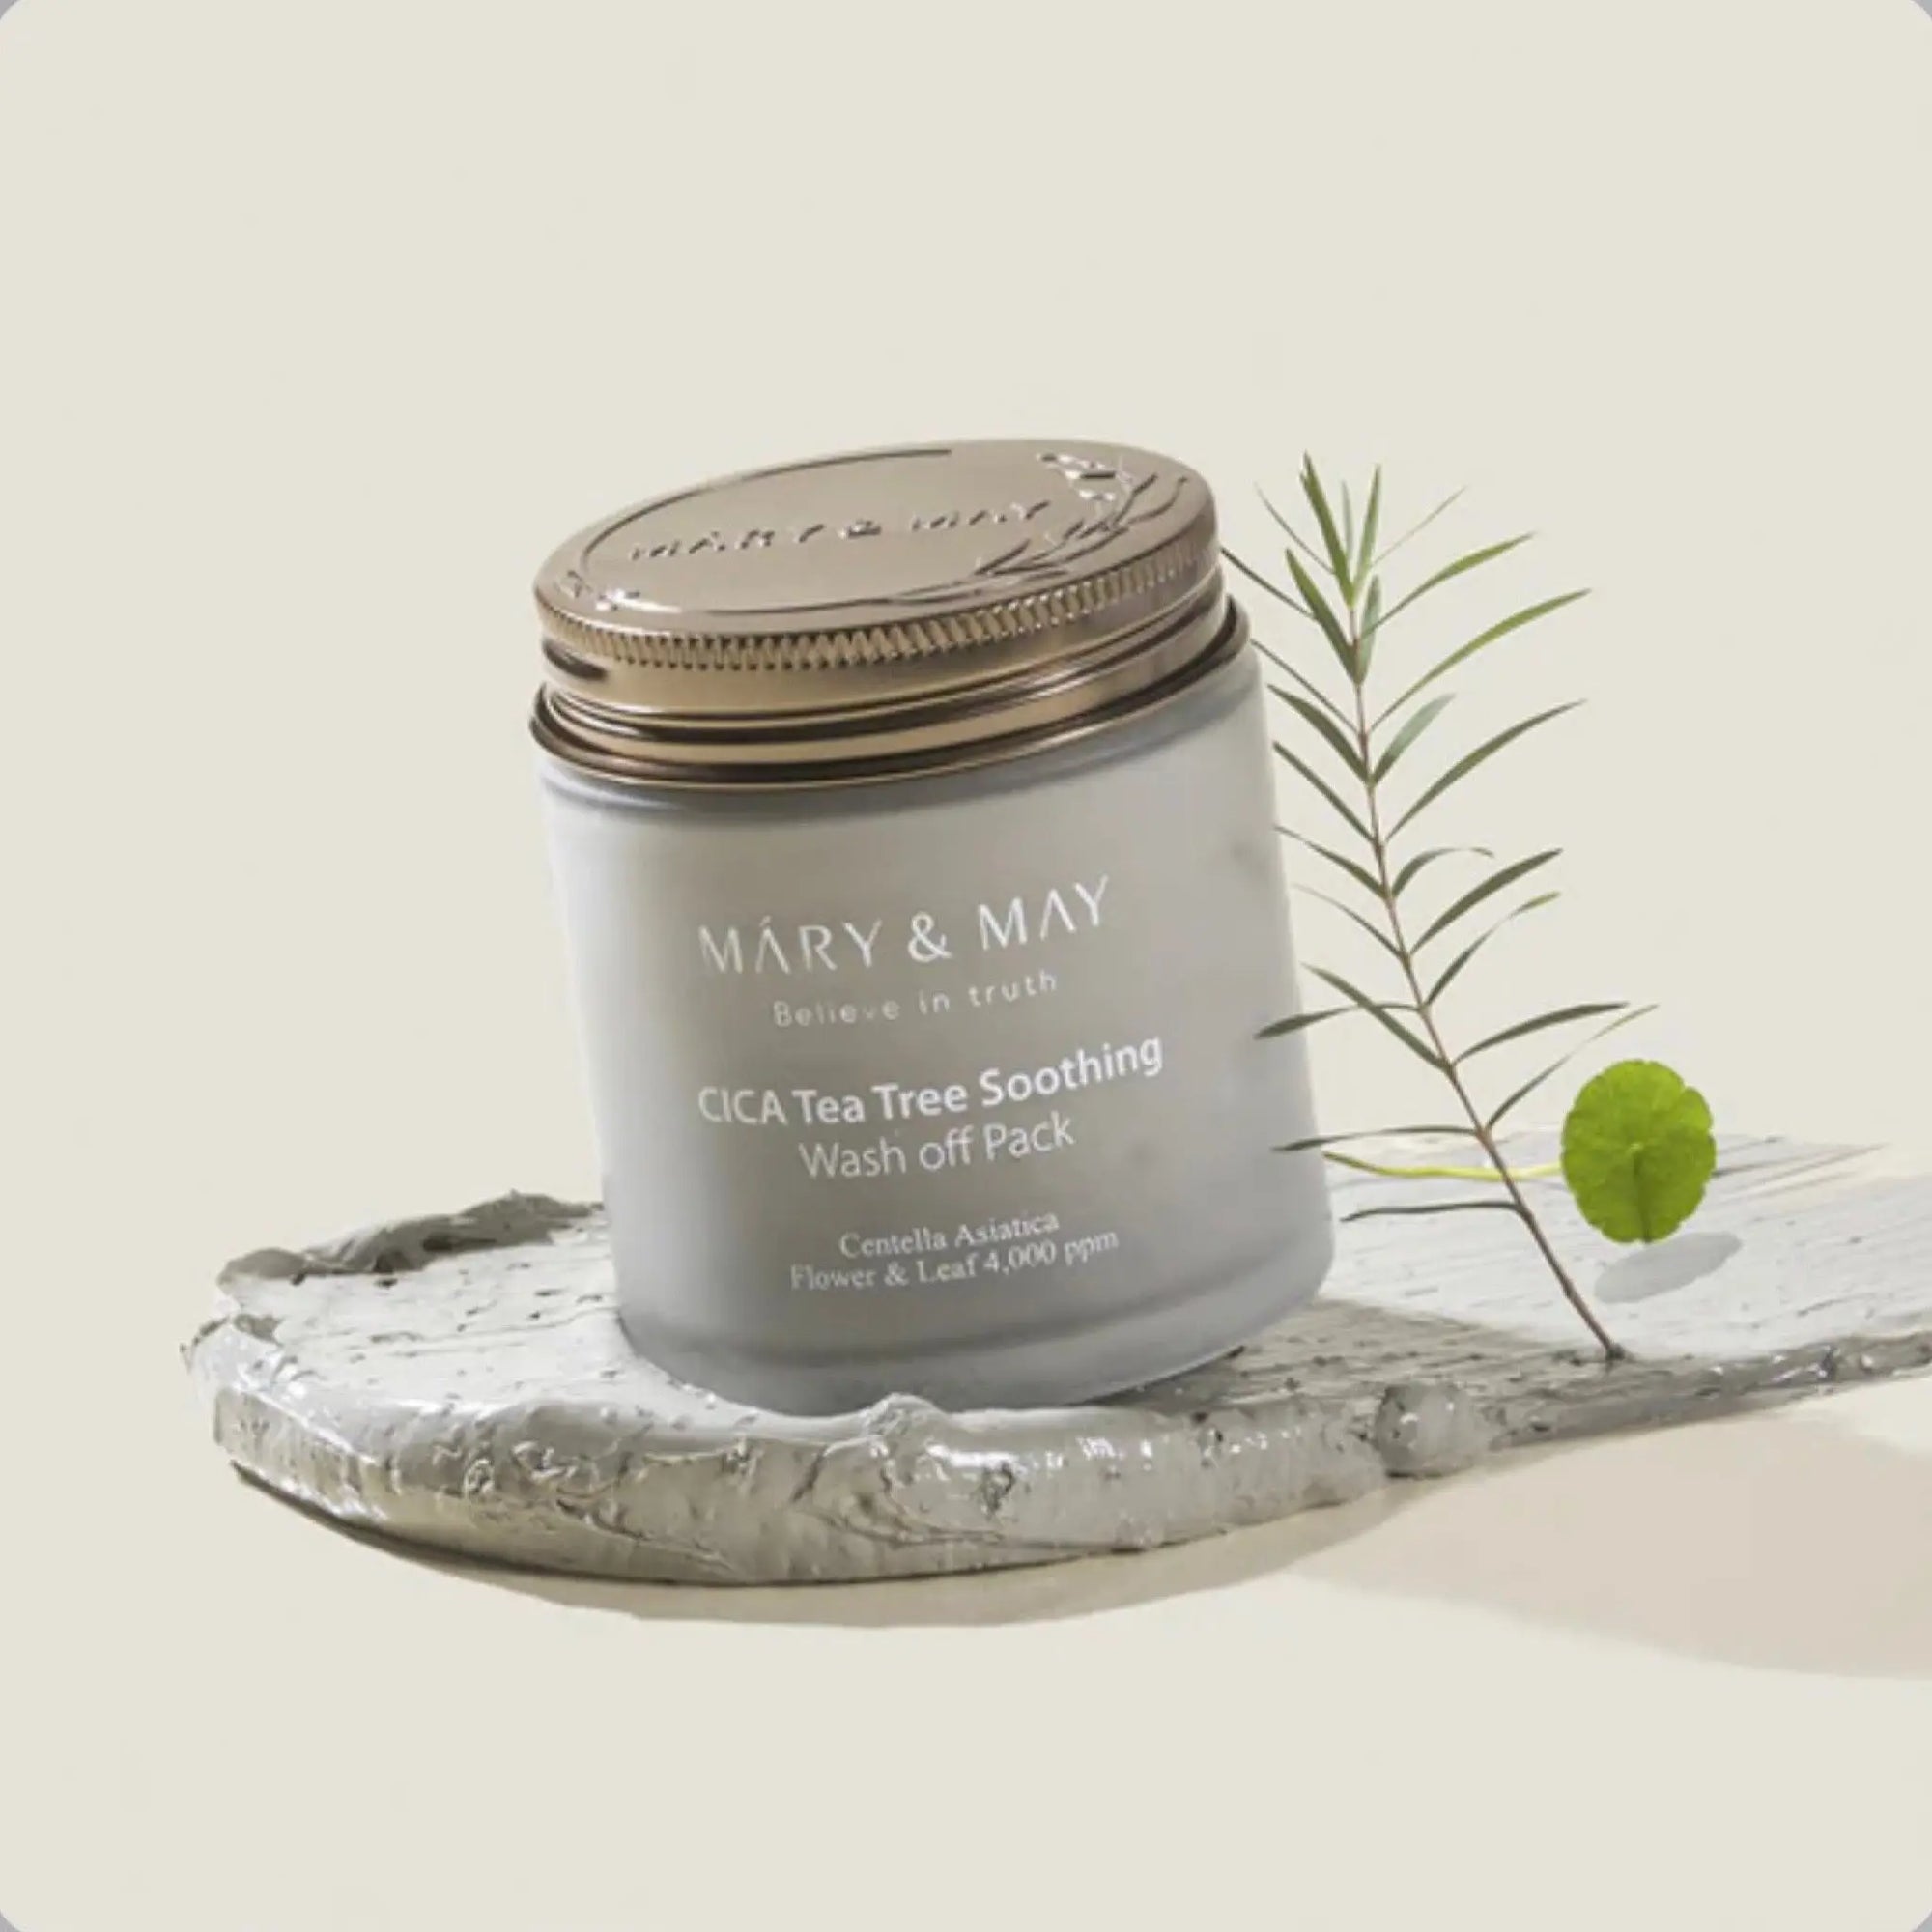 Mary & May- CICA TeaTree Soothing Wash Off Pack Mary & May